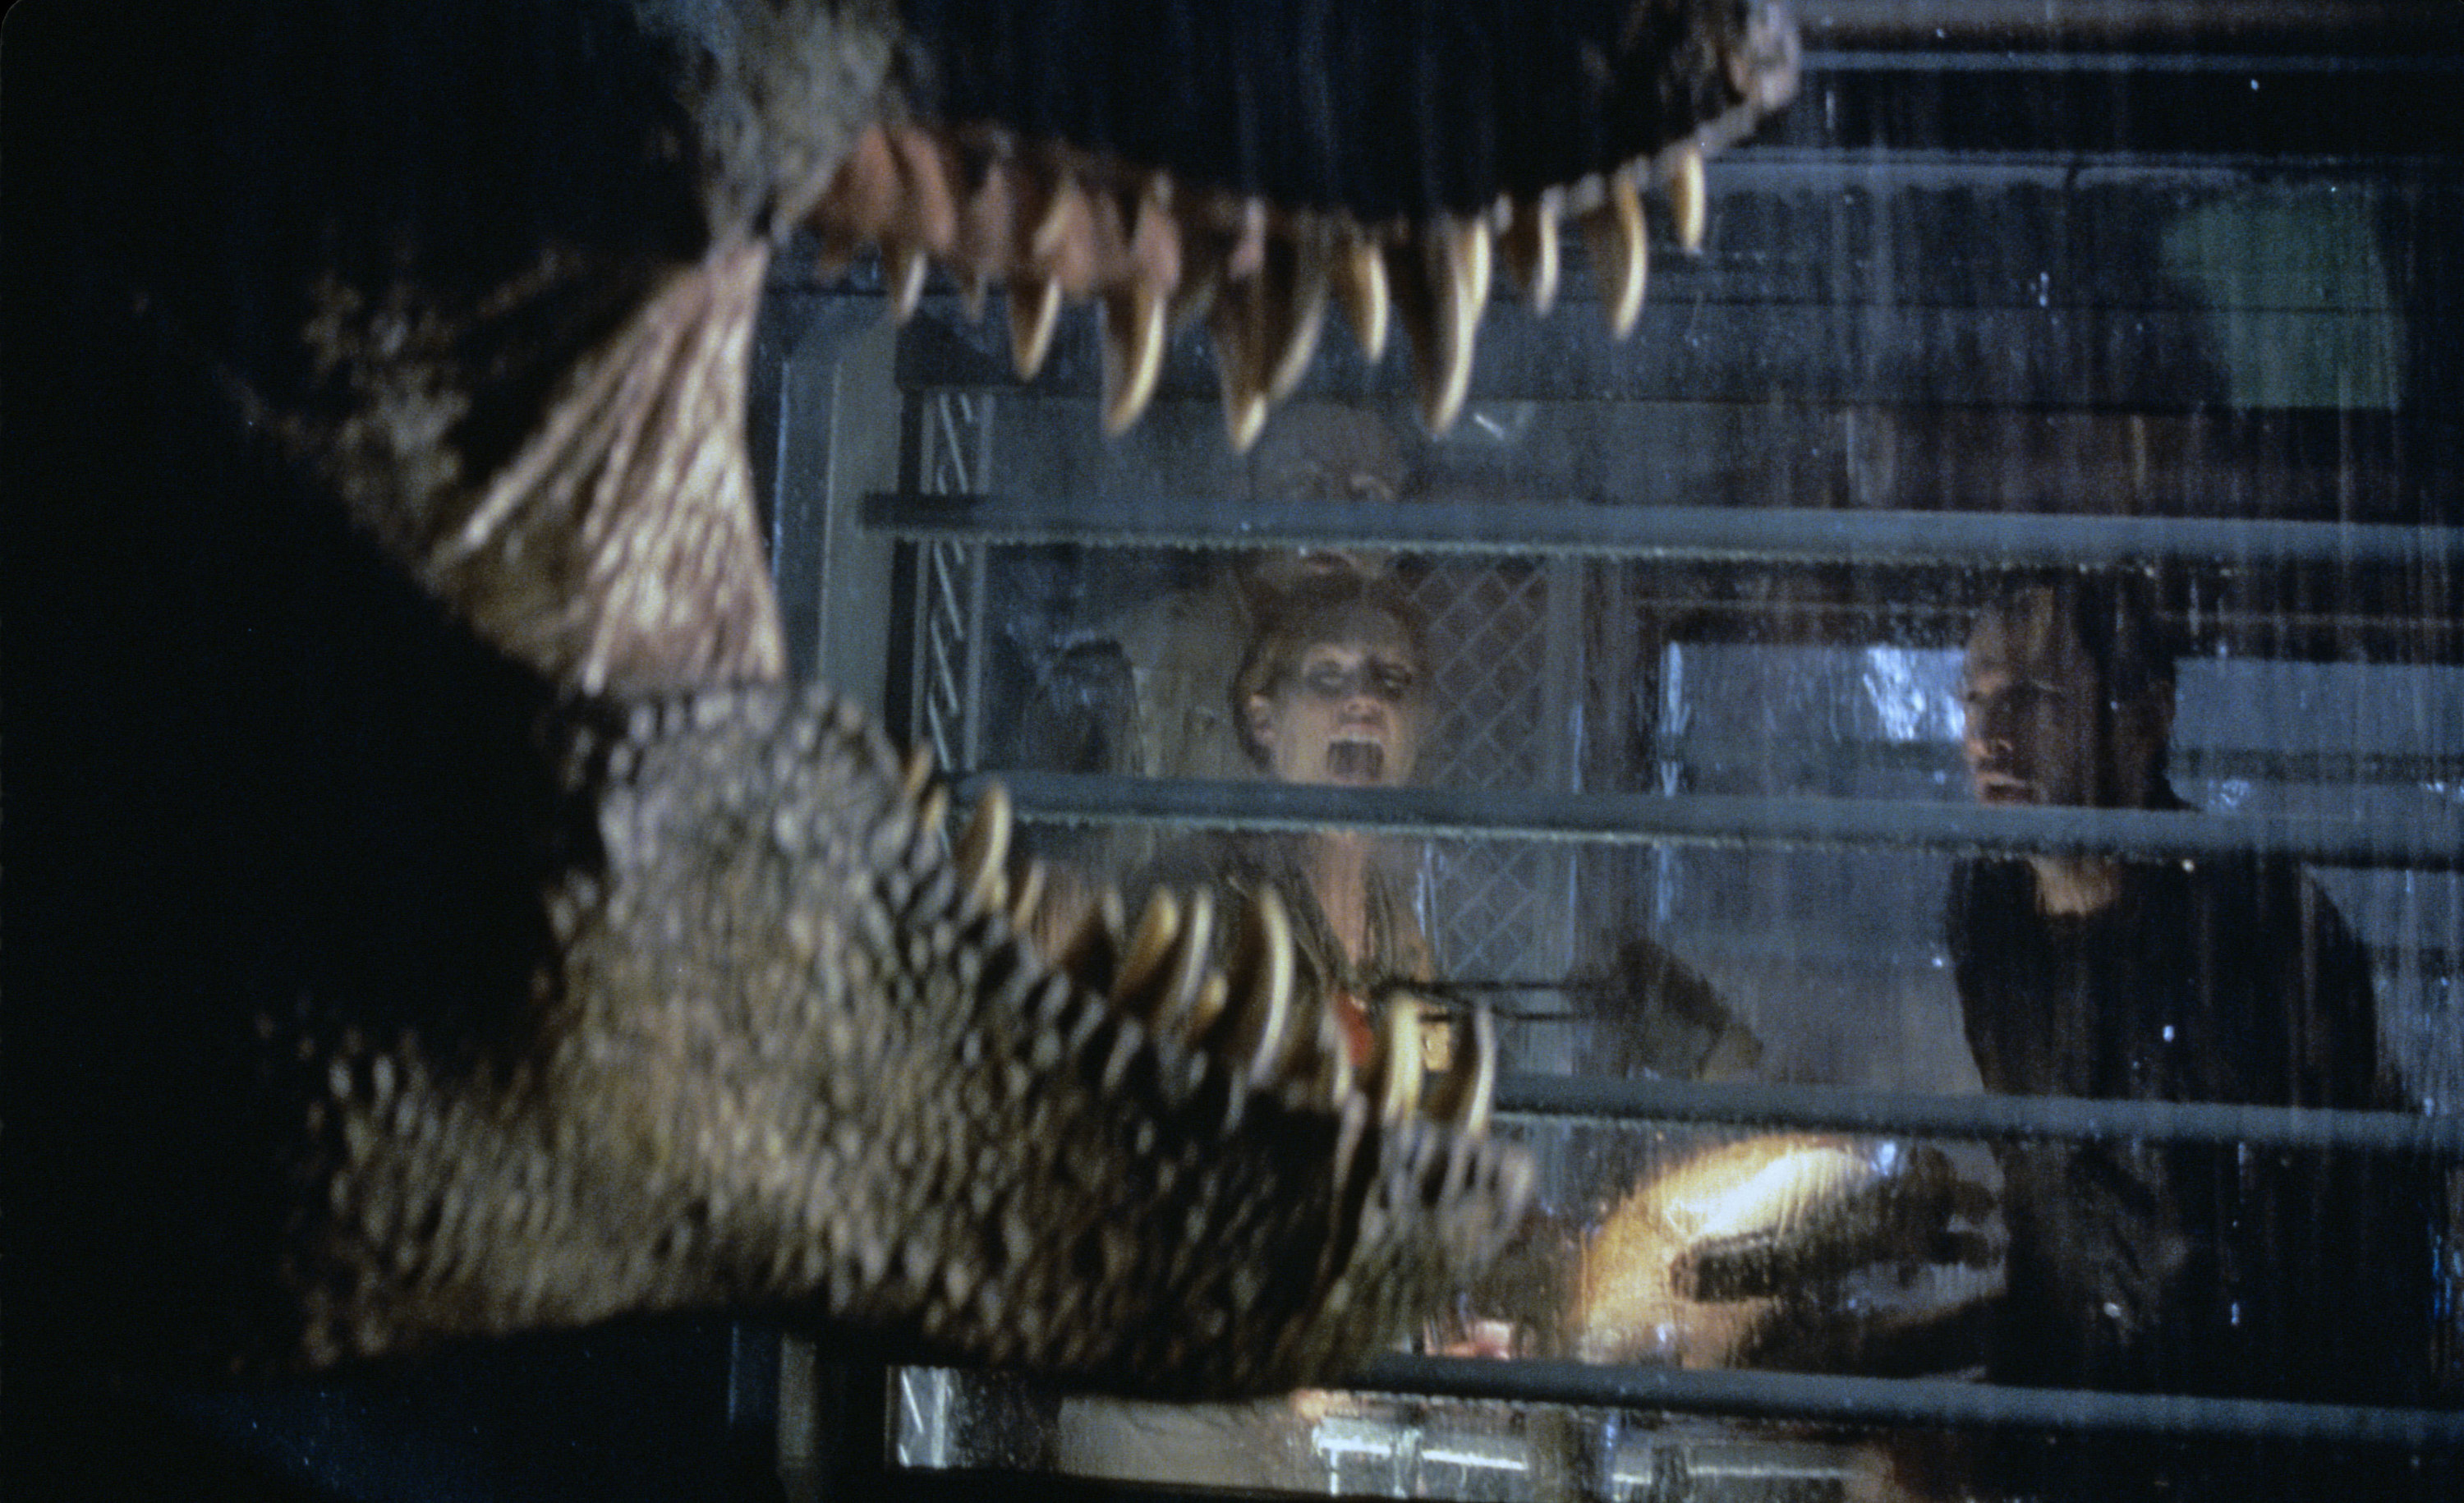 Vince Vaughn, Julianne Moore, and Jeff Goldblum in “The Lost World: Jurassic Park”